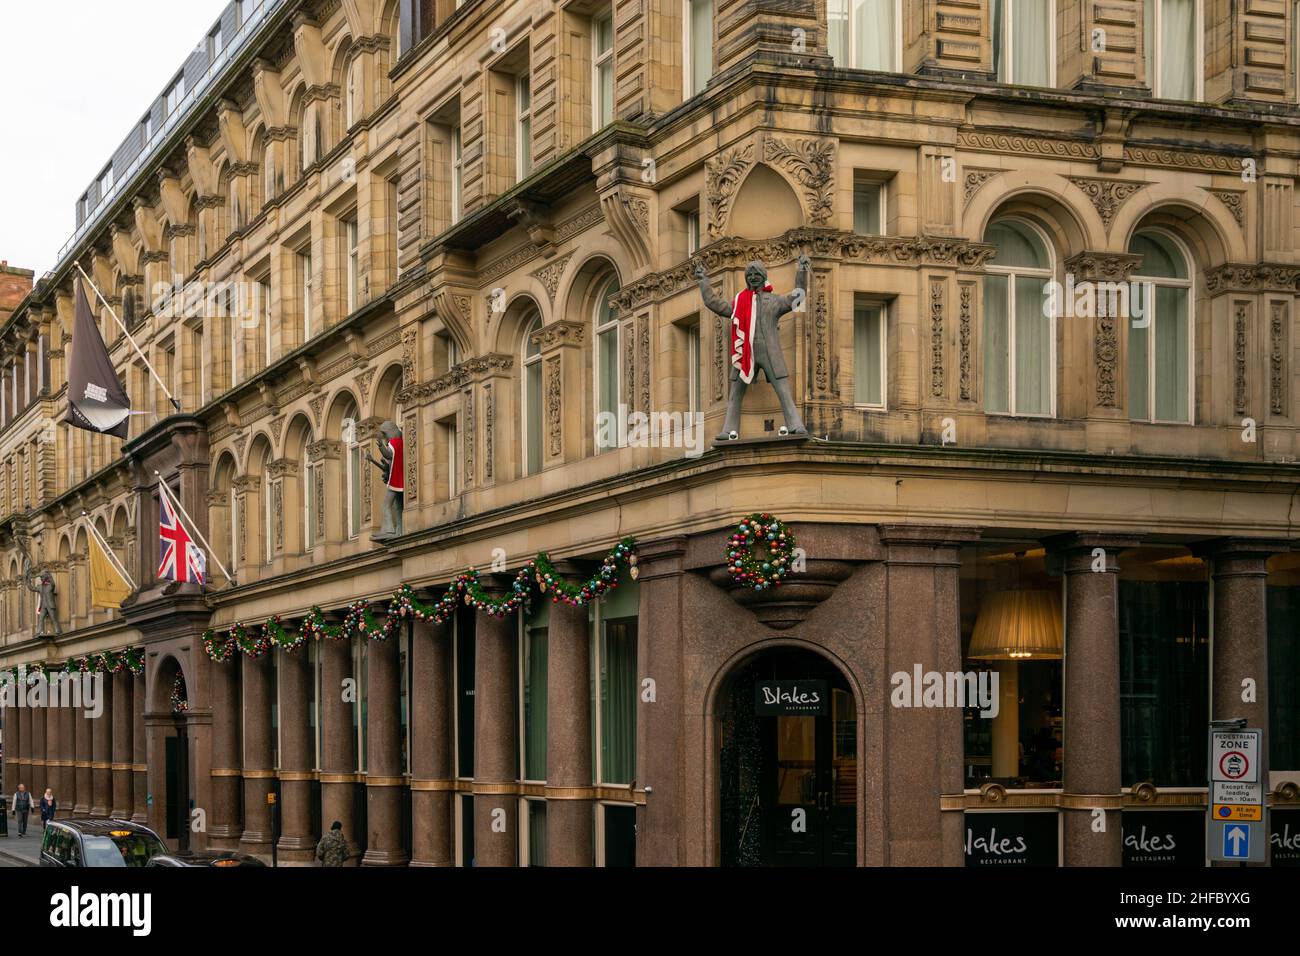 Liverpool, UK - 5 Jan 2020: Hard Days Night Hotel. The world's only Beatles inspired hotel, combining high quality facilities in a truly unique enviro Stock Photo